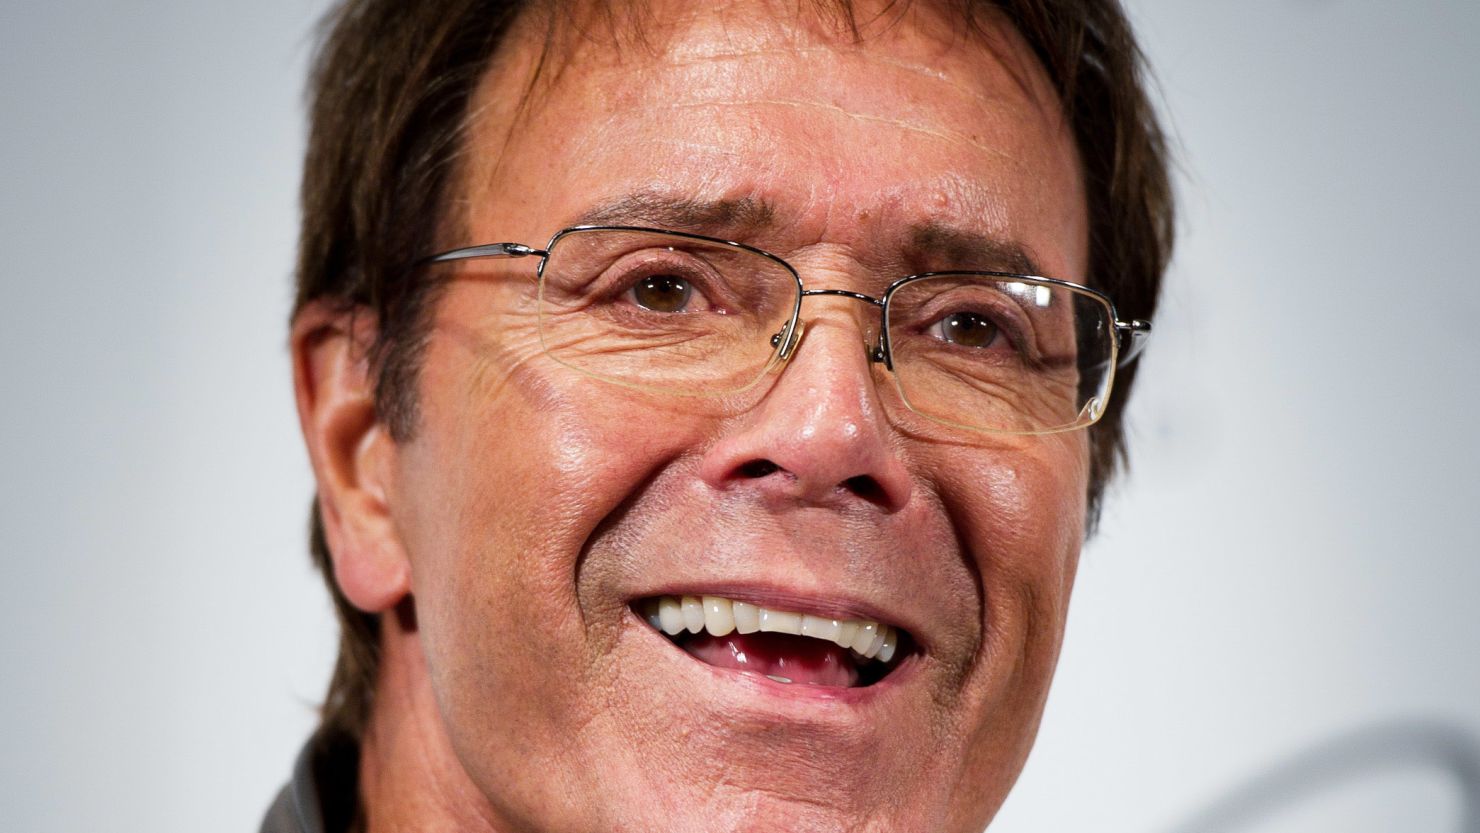 Cliff Richard says he's "thrilled that the vile accusations and the resulting investigation" have come to an end.